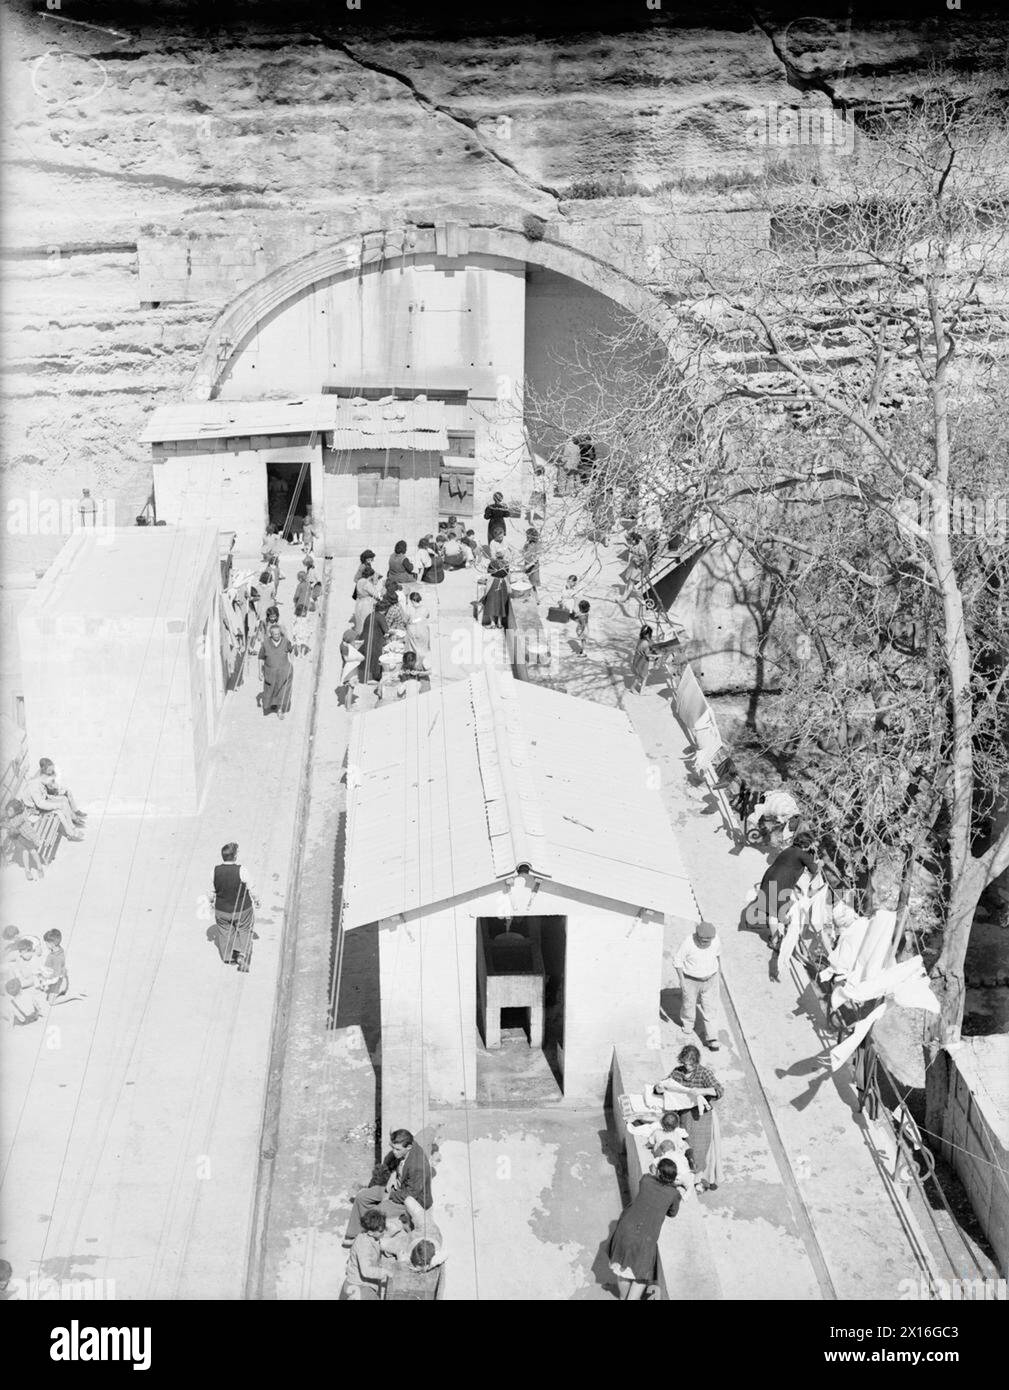 MALTA SUFFERS BIGGEST RAID OF THE WAR SO FAR. 7 APRIL 1942, MALTA. DAMAGE TO CIVILIAN PROPERTY AS A RESULT OF THE MASSIVE AXIS RAID. - An old railway tunnel makes a good air raid shelter. Here the islanders are seen taking the opportunity of a lull in the 'blitz' to get some fresh air and exercise Stock Photo